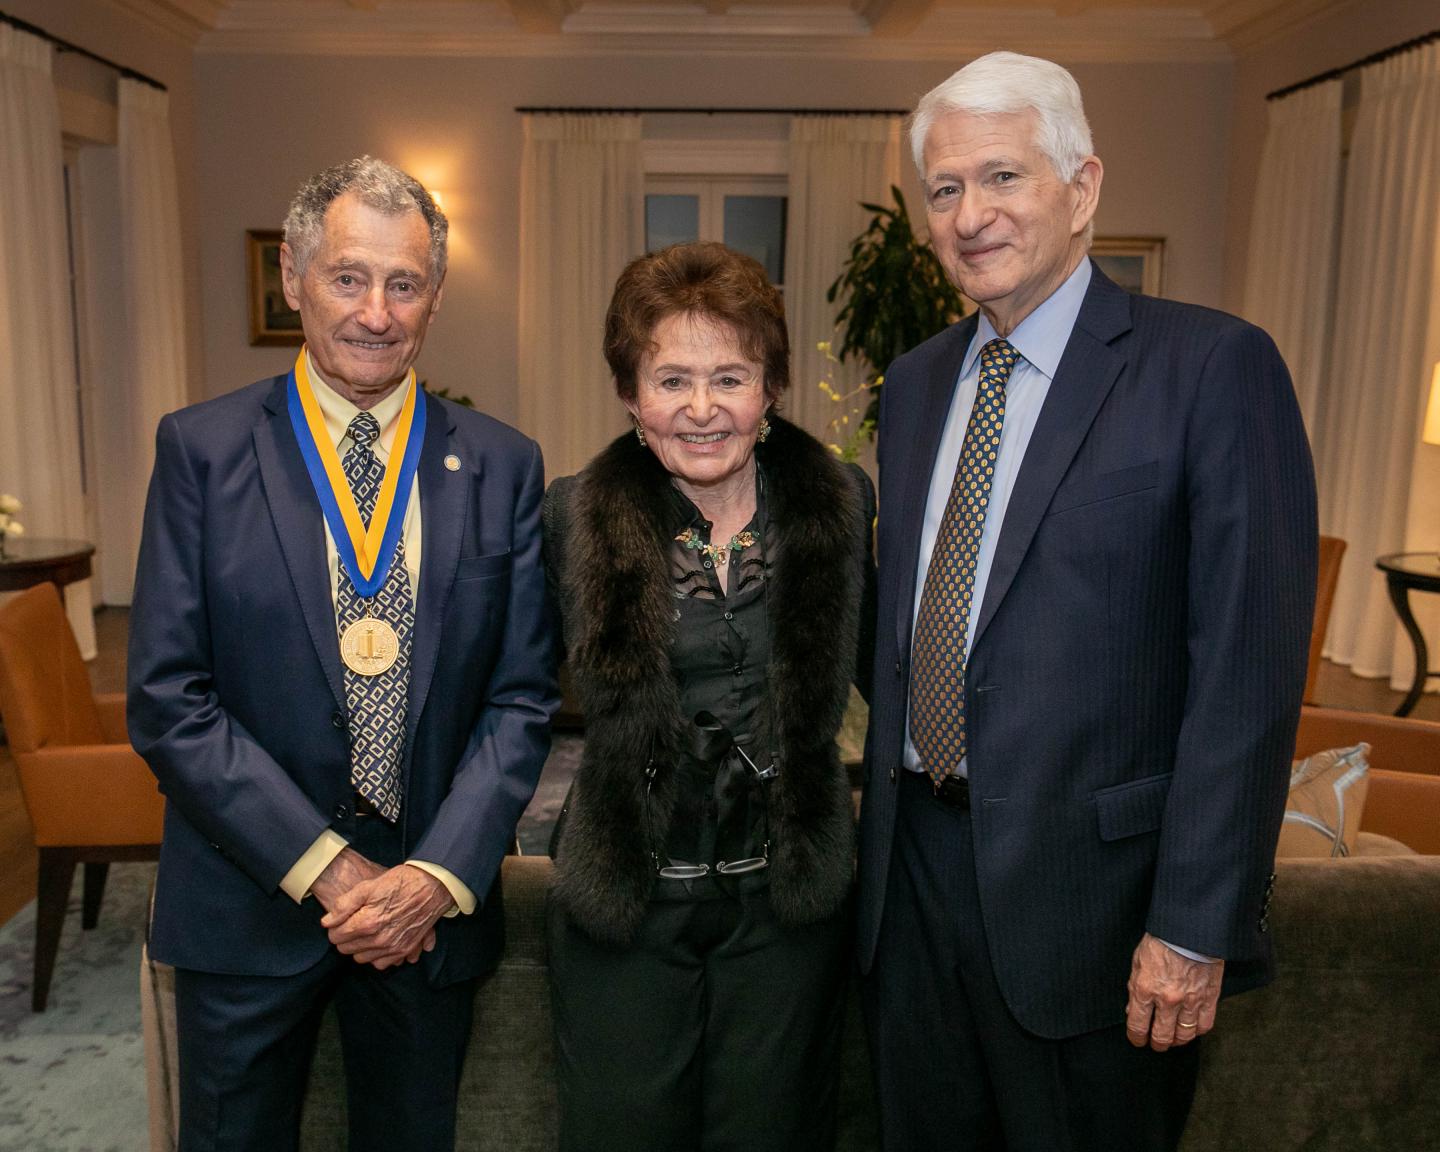 The Kleinrocks with UCLA Chancellor Block